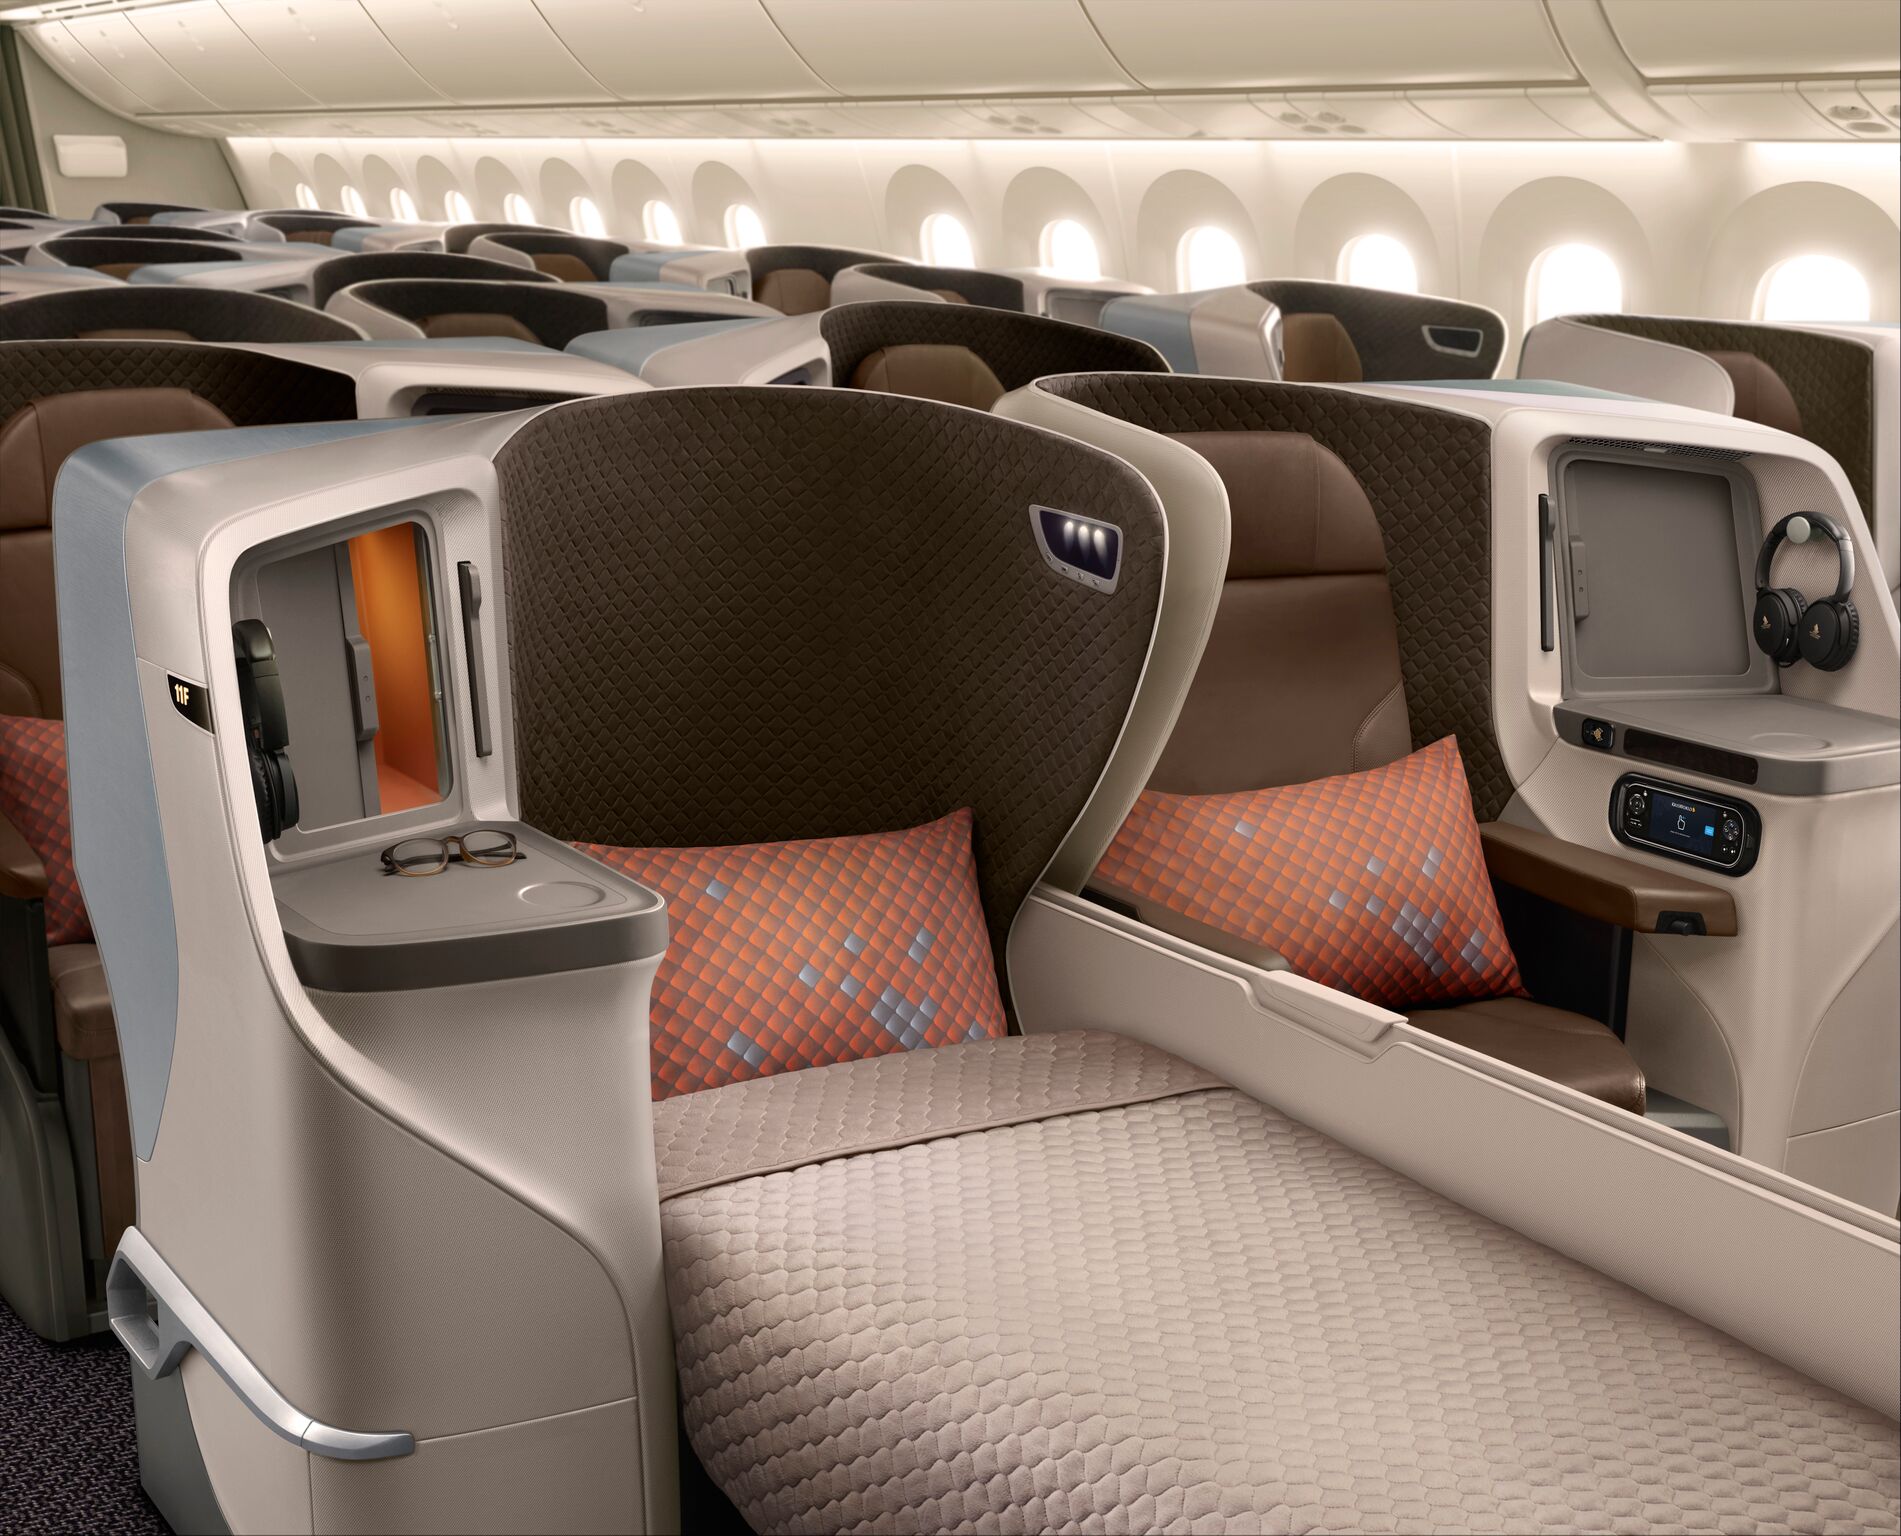 Singapore Airlines 787-10 proves perfect PaxEx fit for midrange